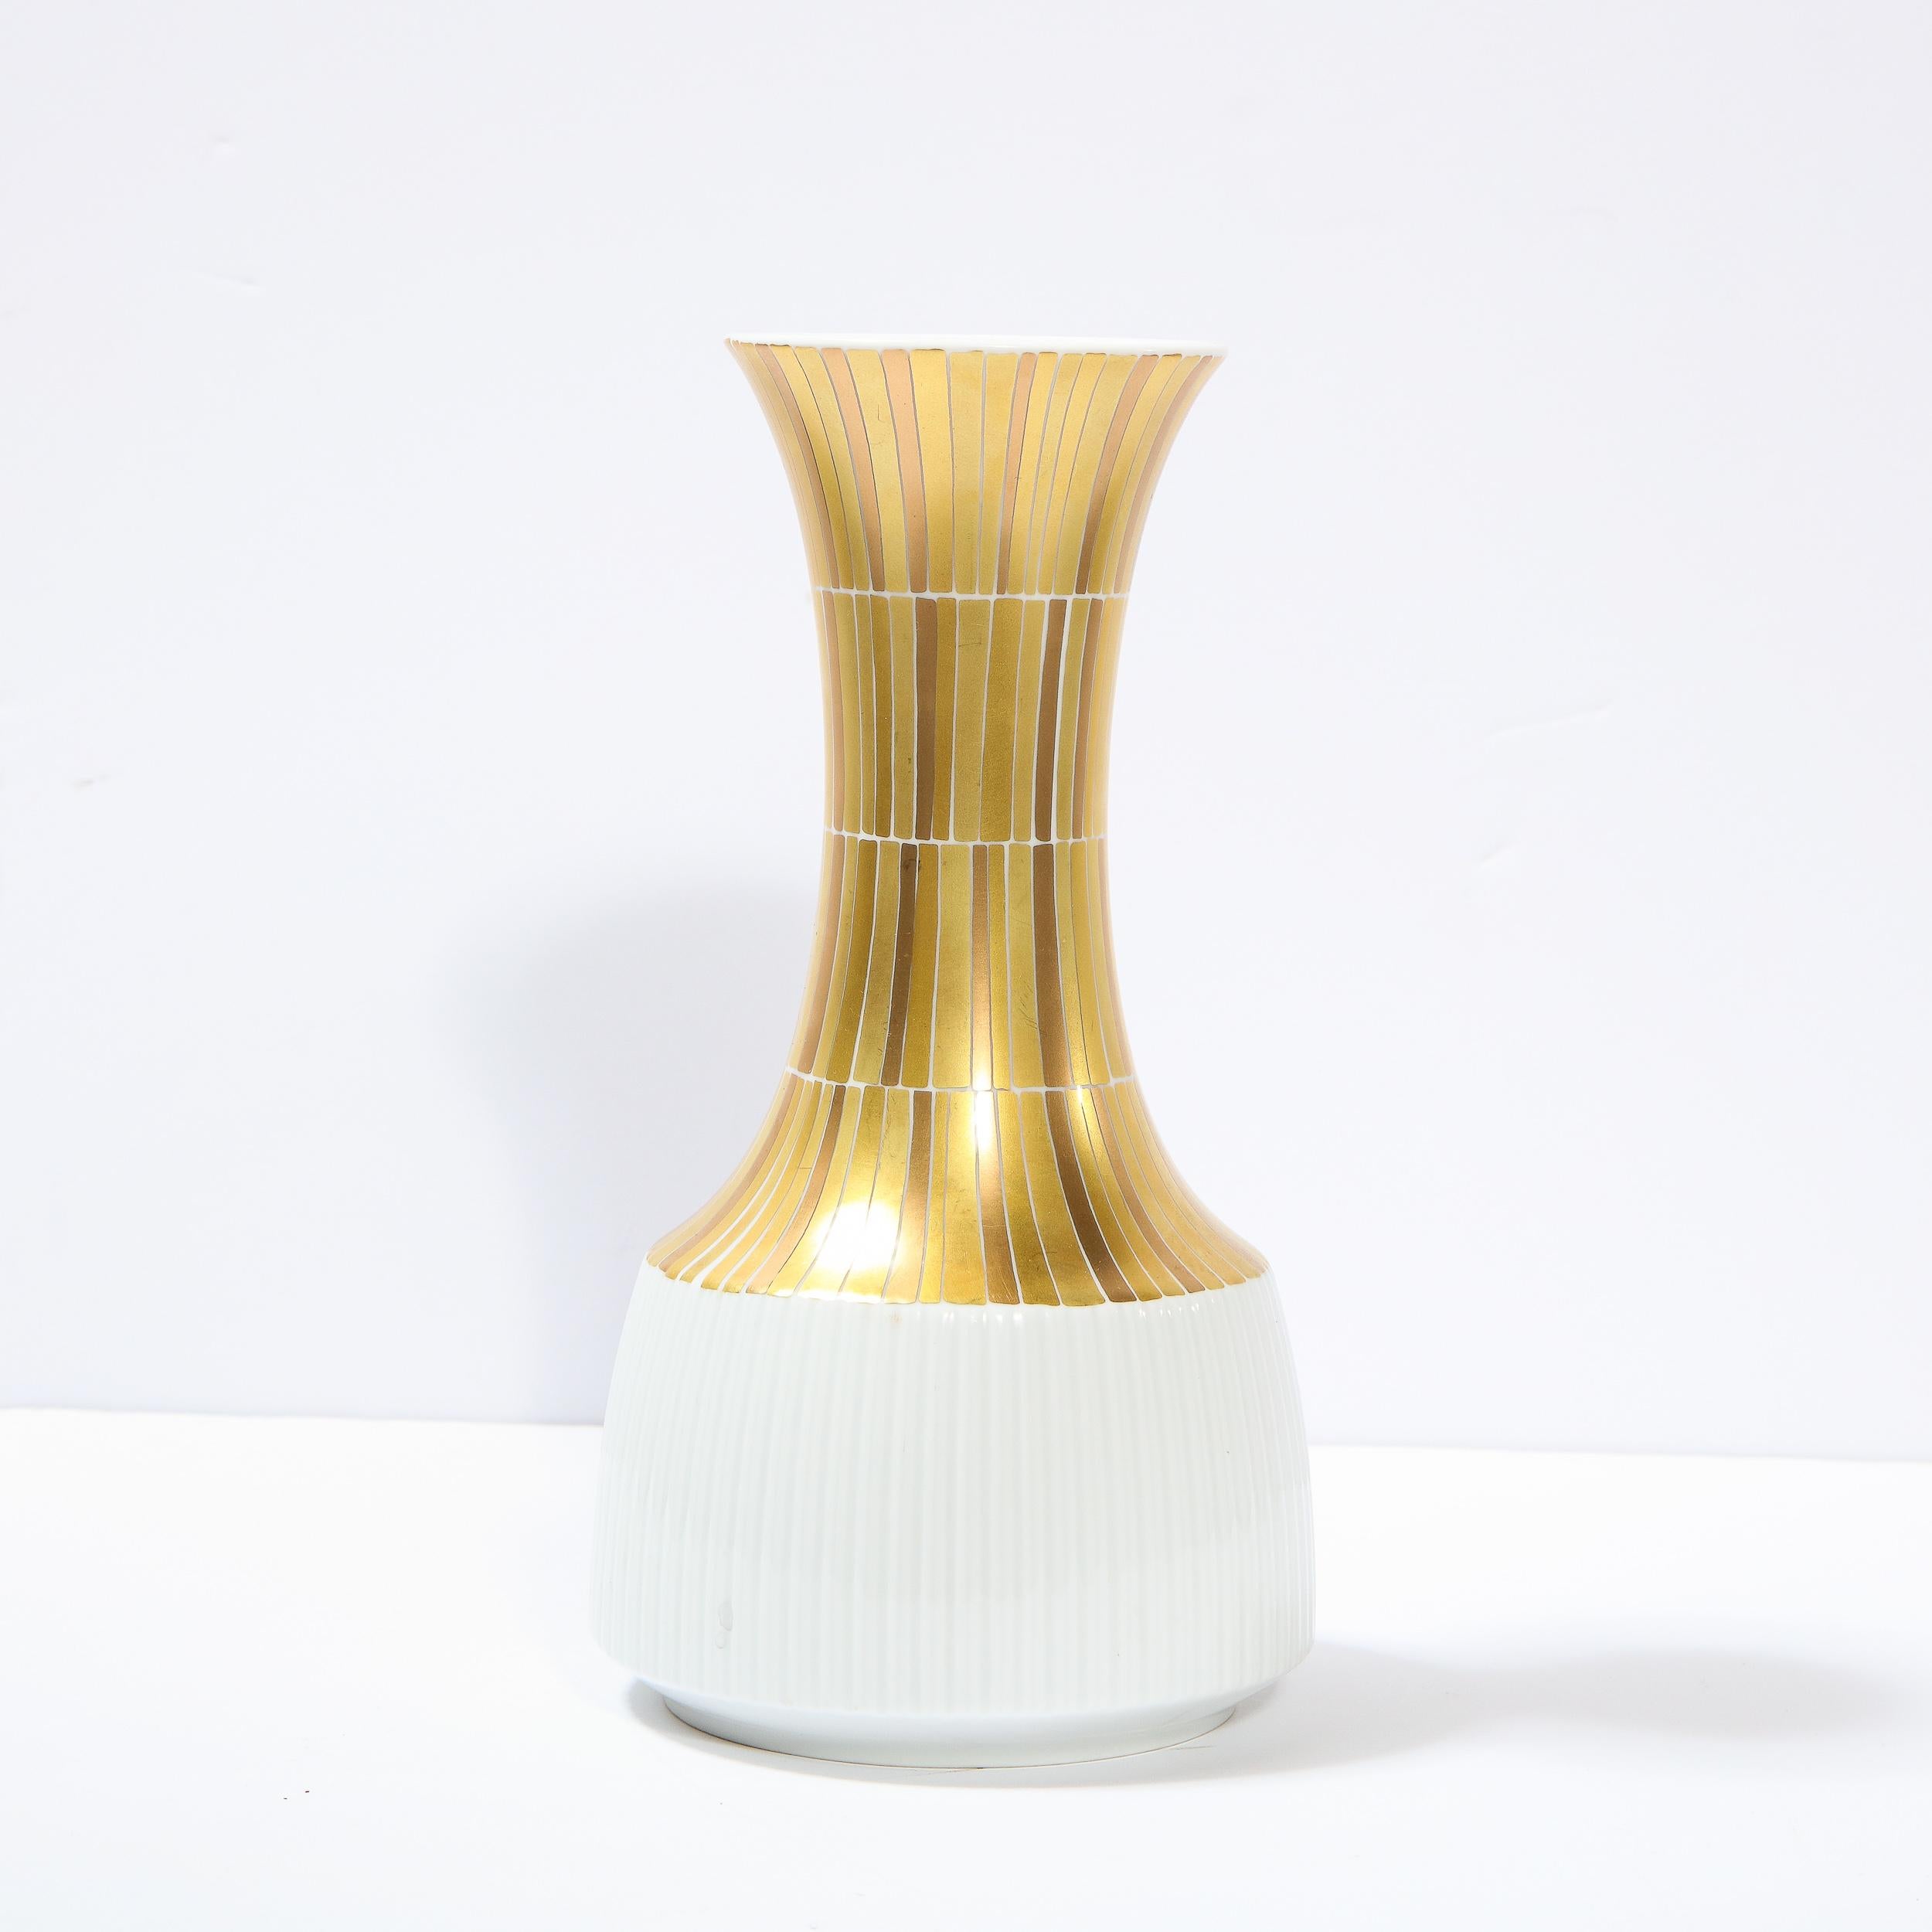 This beautiful porcelain vase was realized by the esteemed designer Tapio Wirkkala for Rosenthal in Germany, during the latter half of the 20th century. It features a white channeled base; an hourglass form neck with rectilinear 24kt gold detailing;